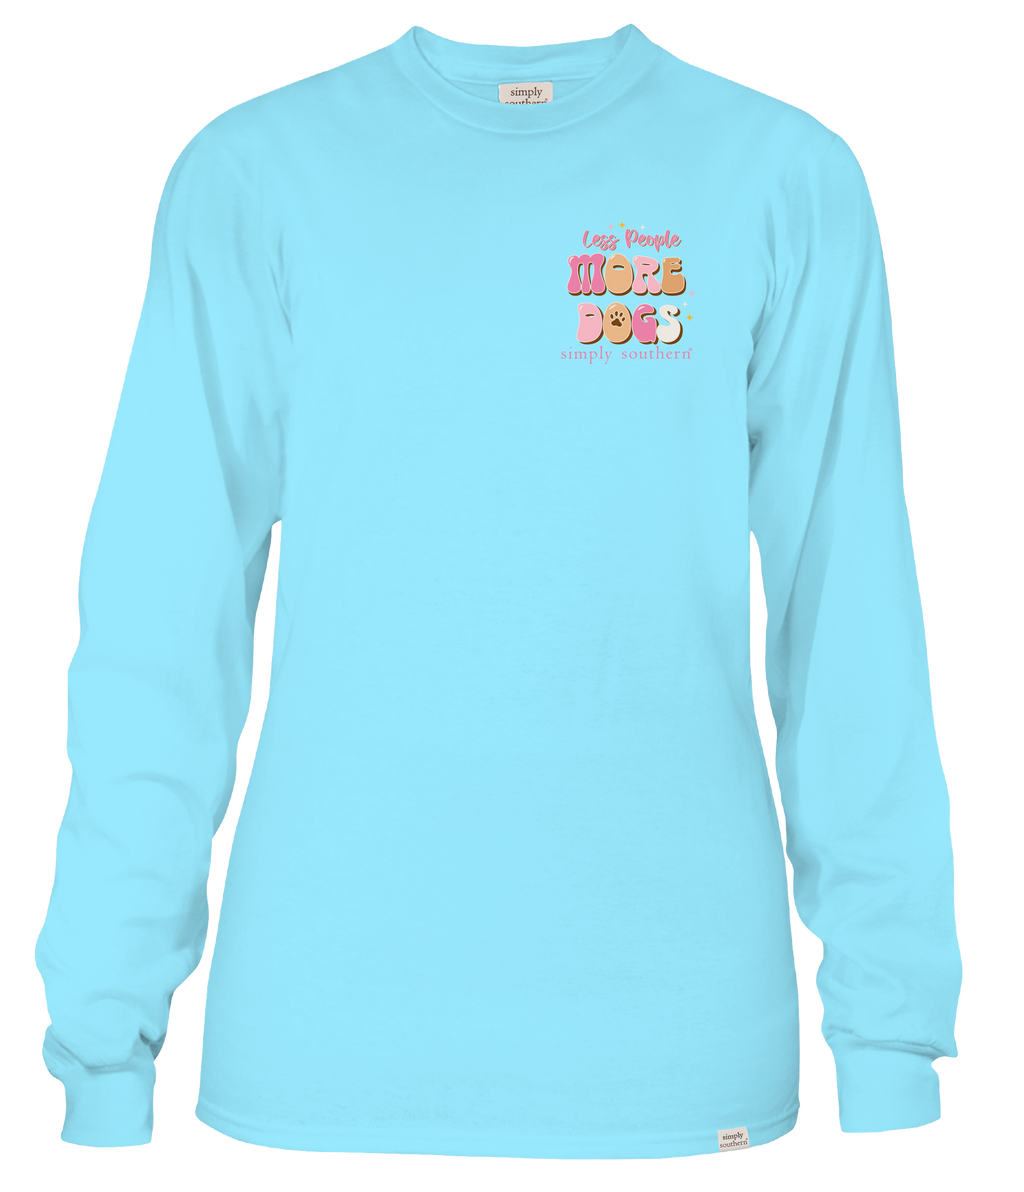 Simply Southern YOUTH, Long Sleeve Tee - MORE DOGS - Monogram Market